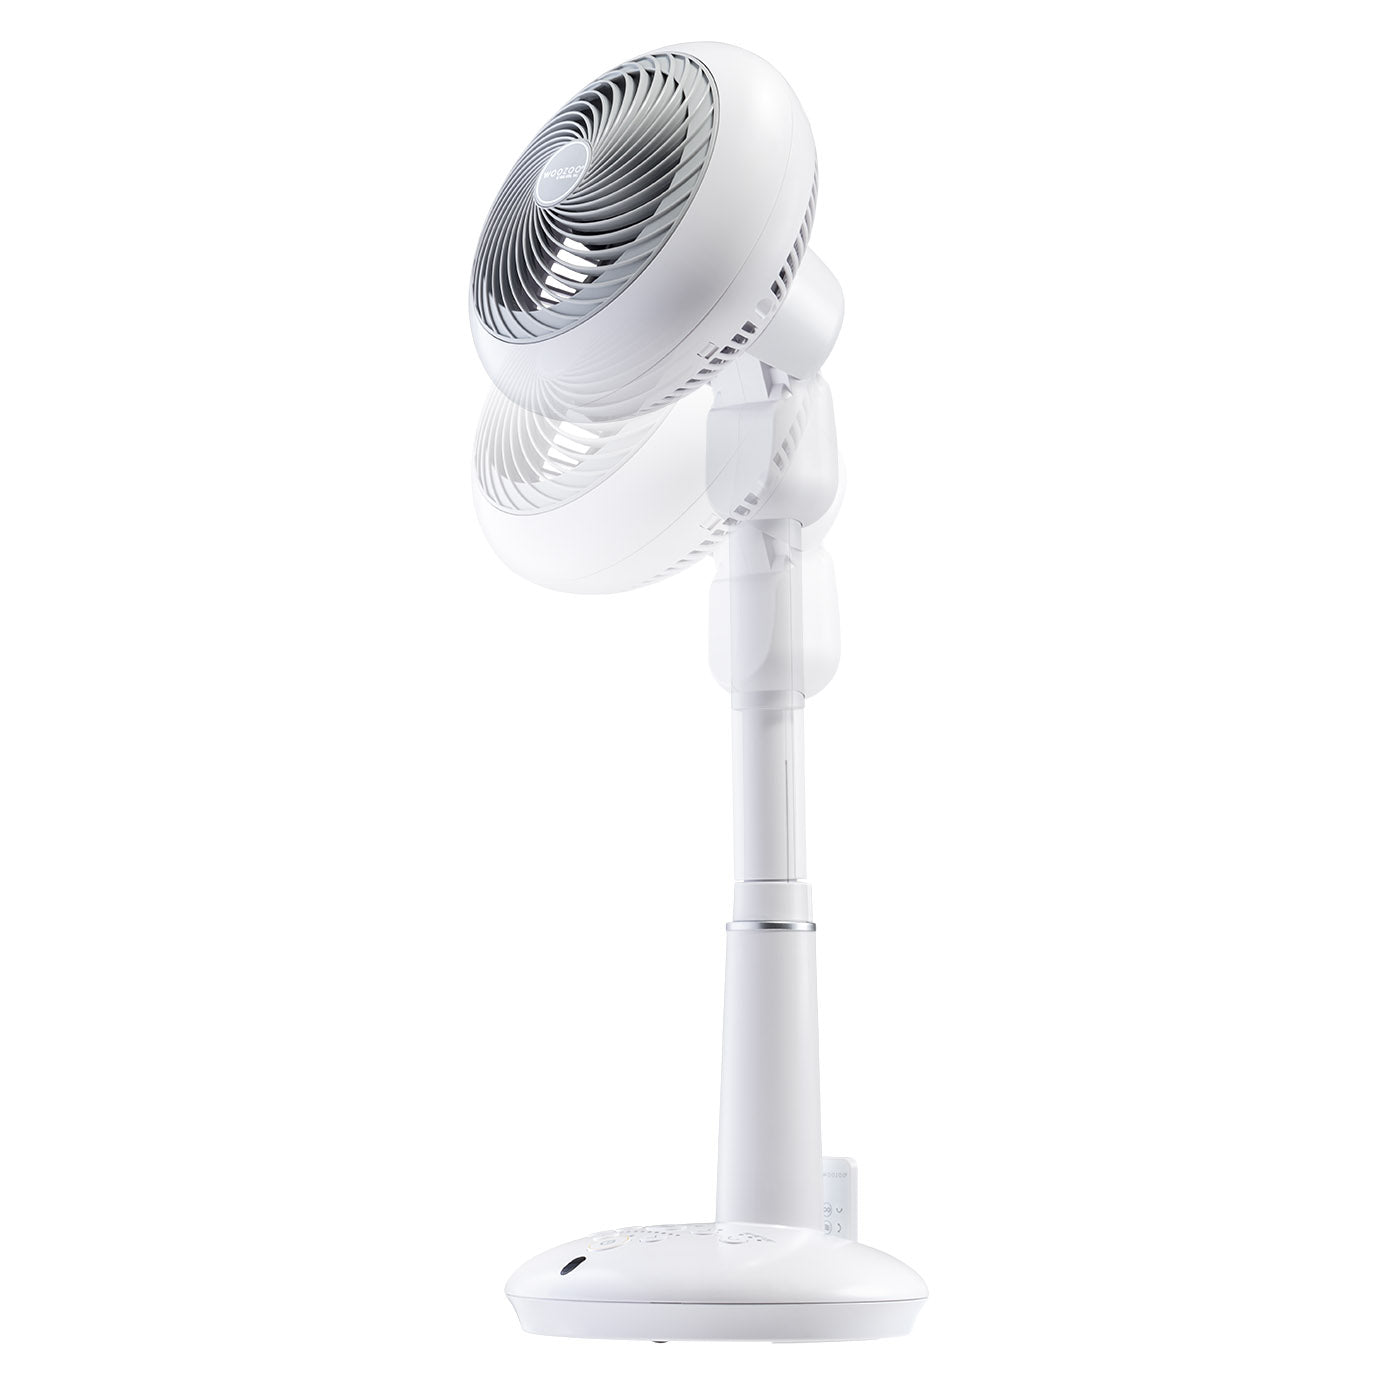 Old Oscillating Fan = Wig Styling Stand Remove one screw, slide